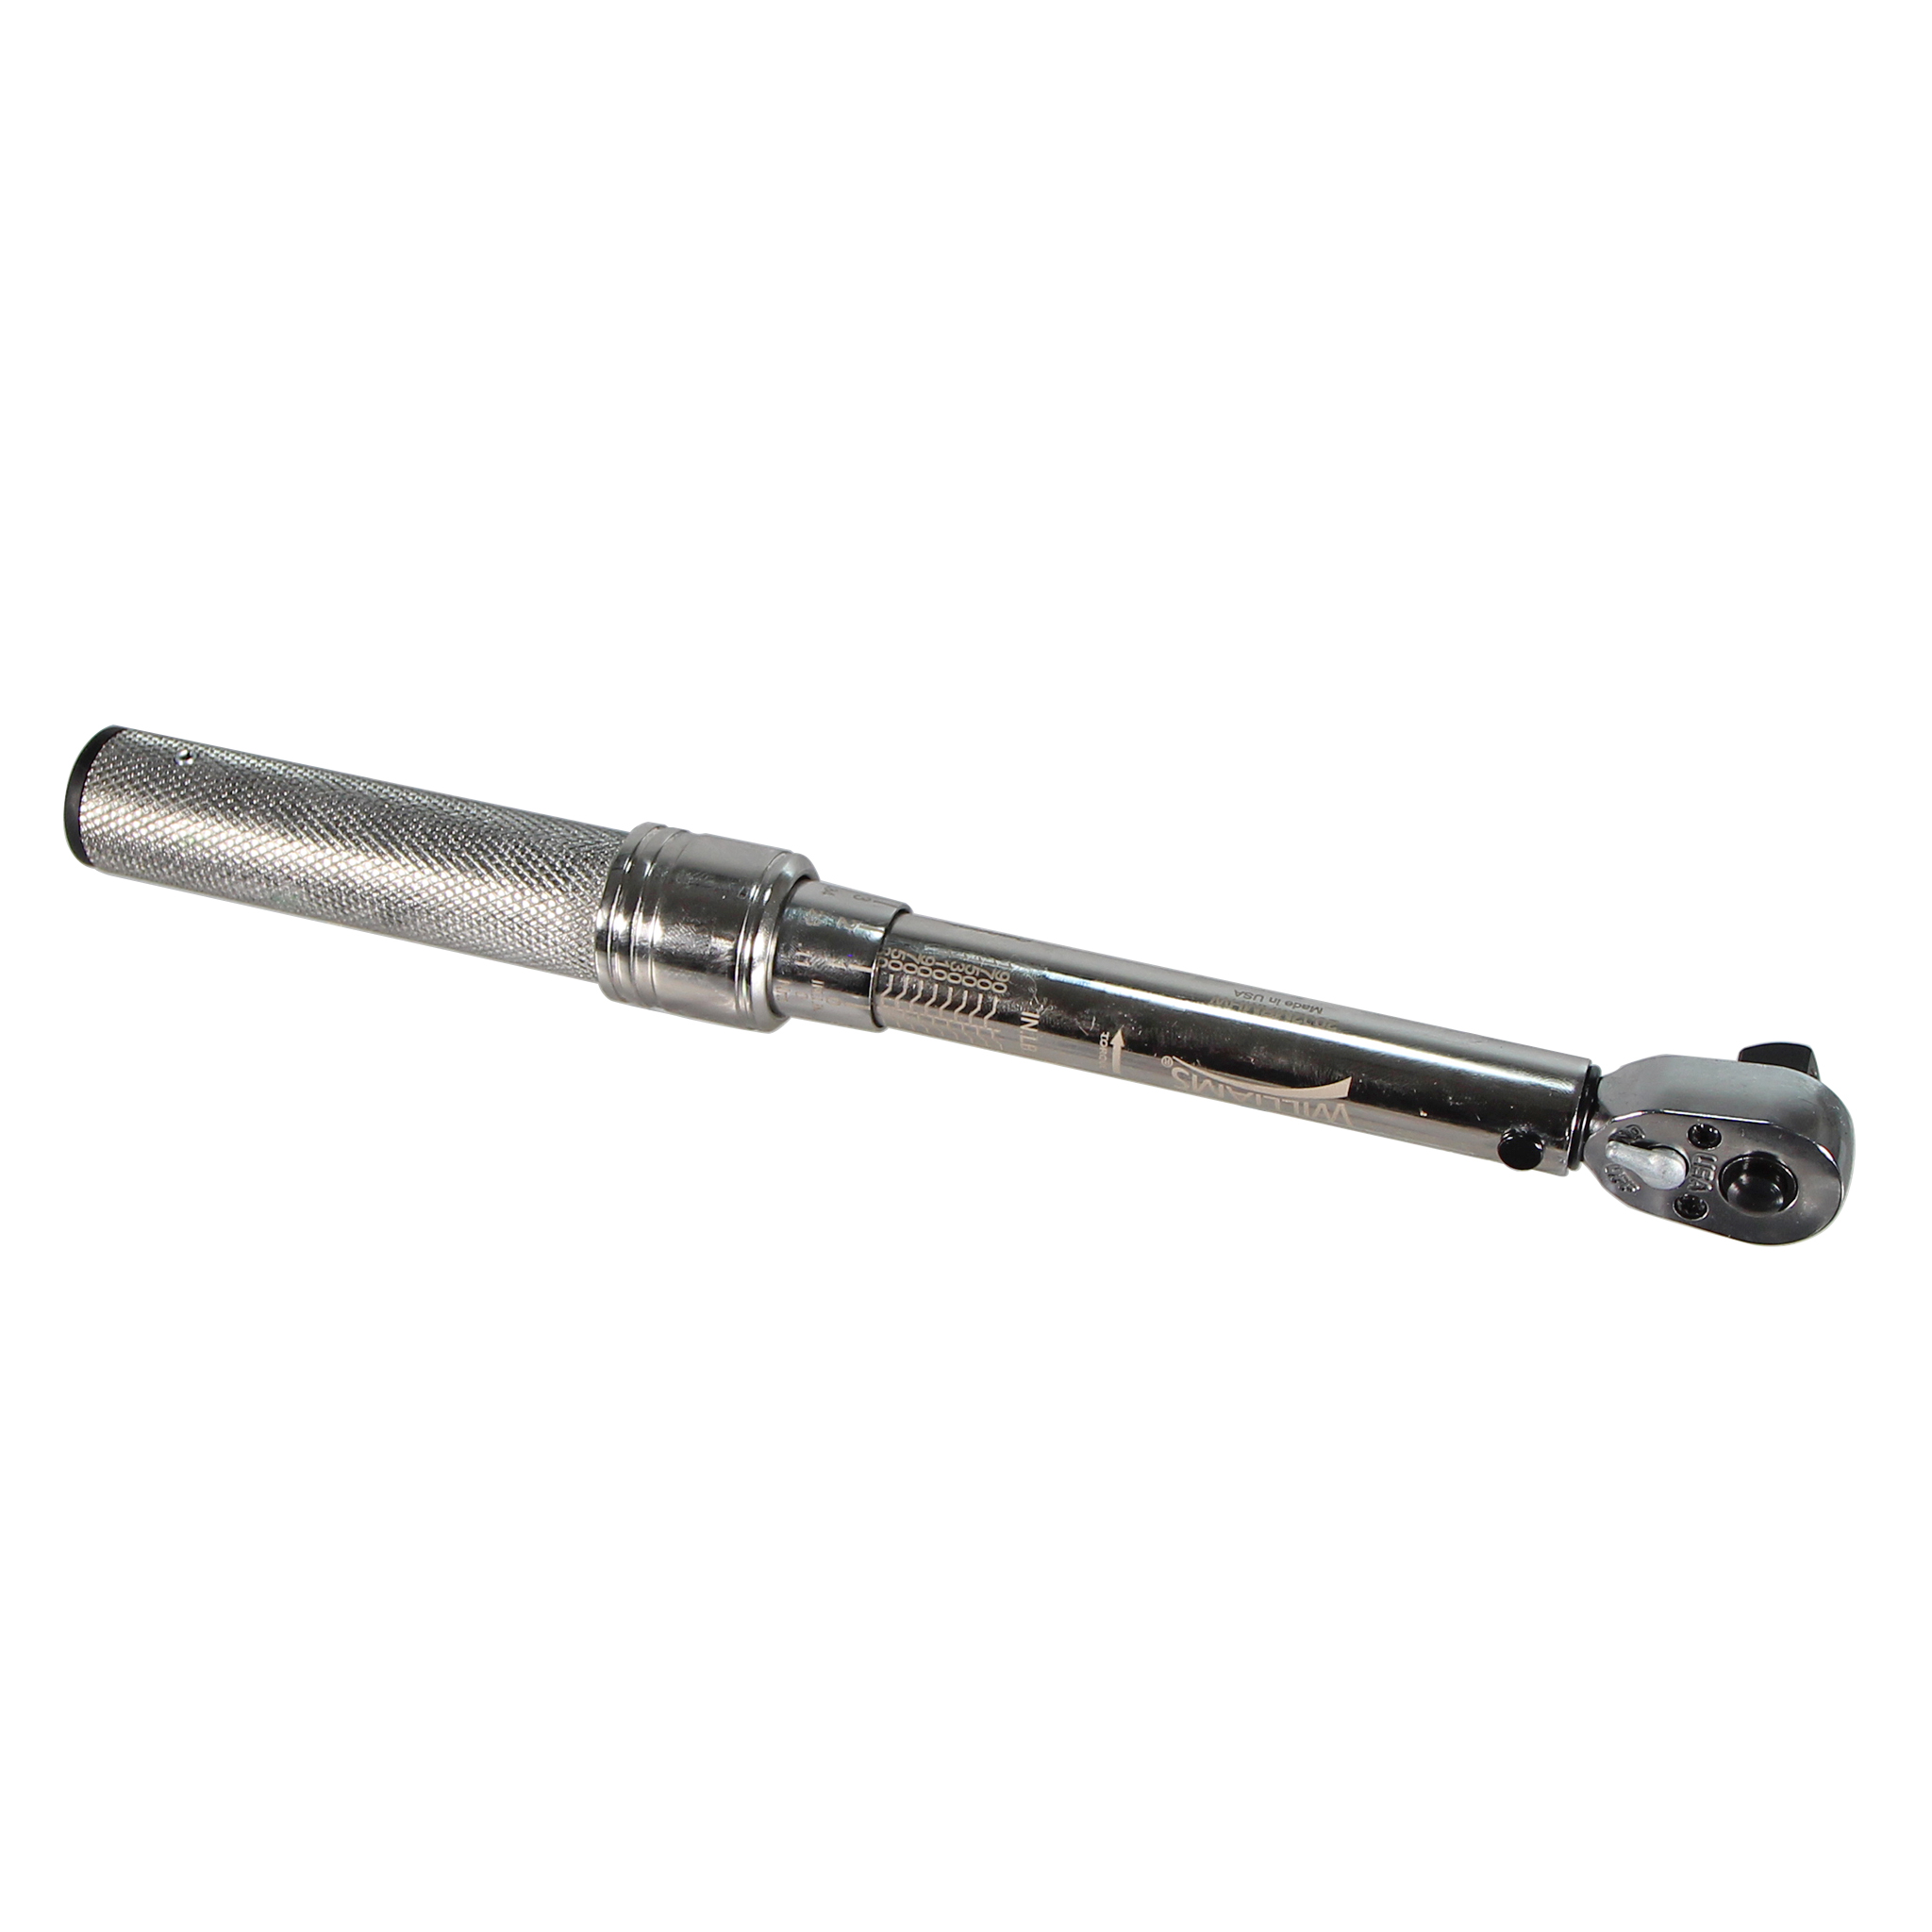 Snap-on Industrial Brands Torque Wrench, 3/8", 30-200in.lb (4-22Nm)